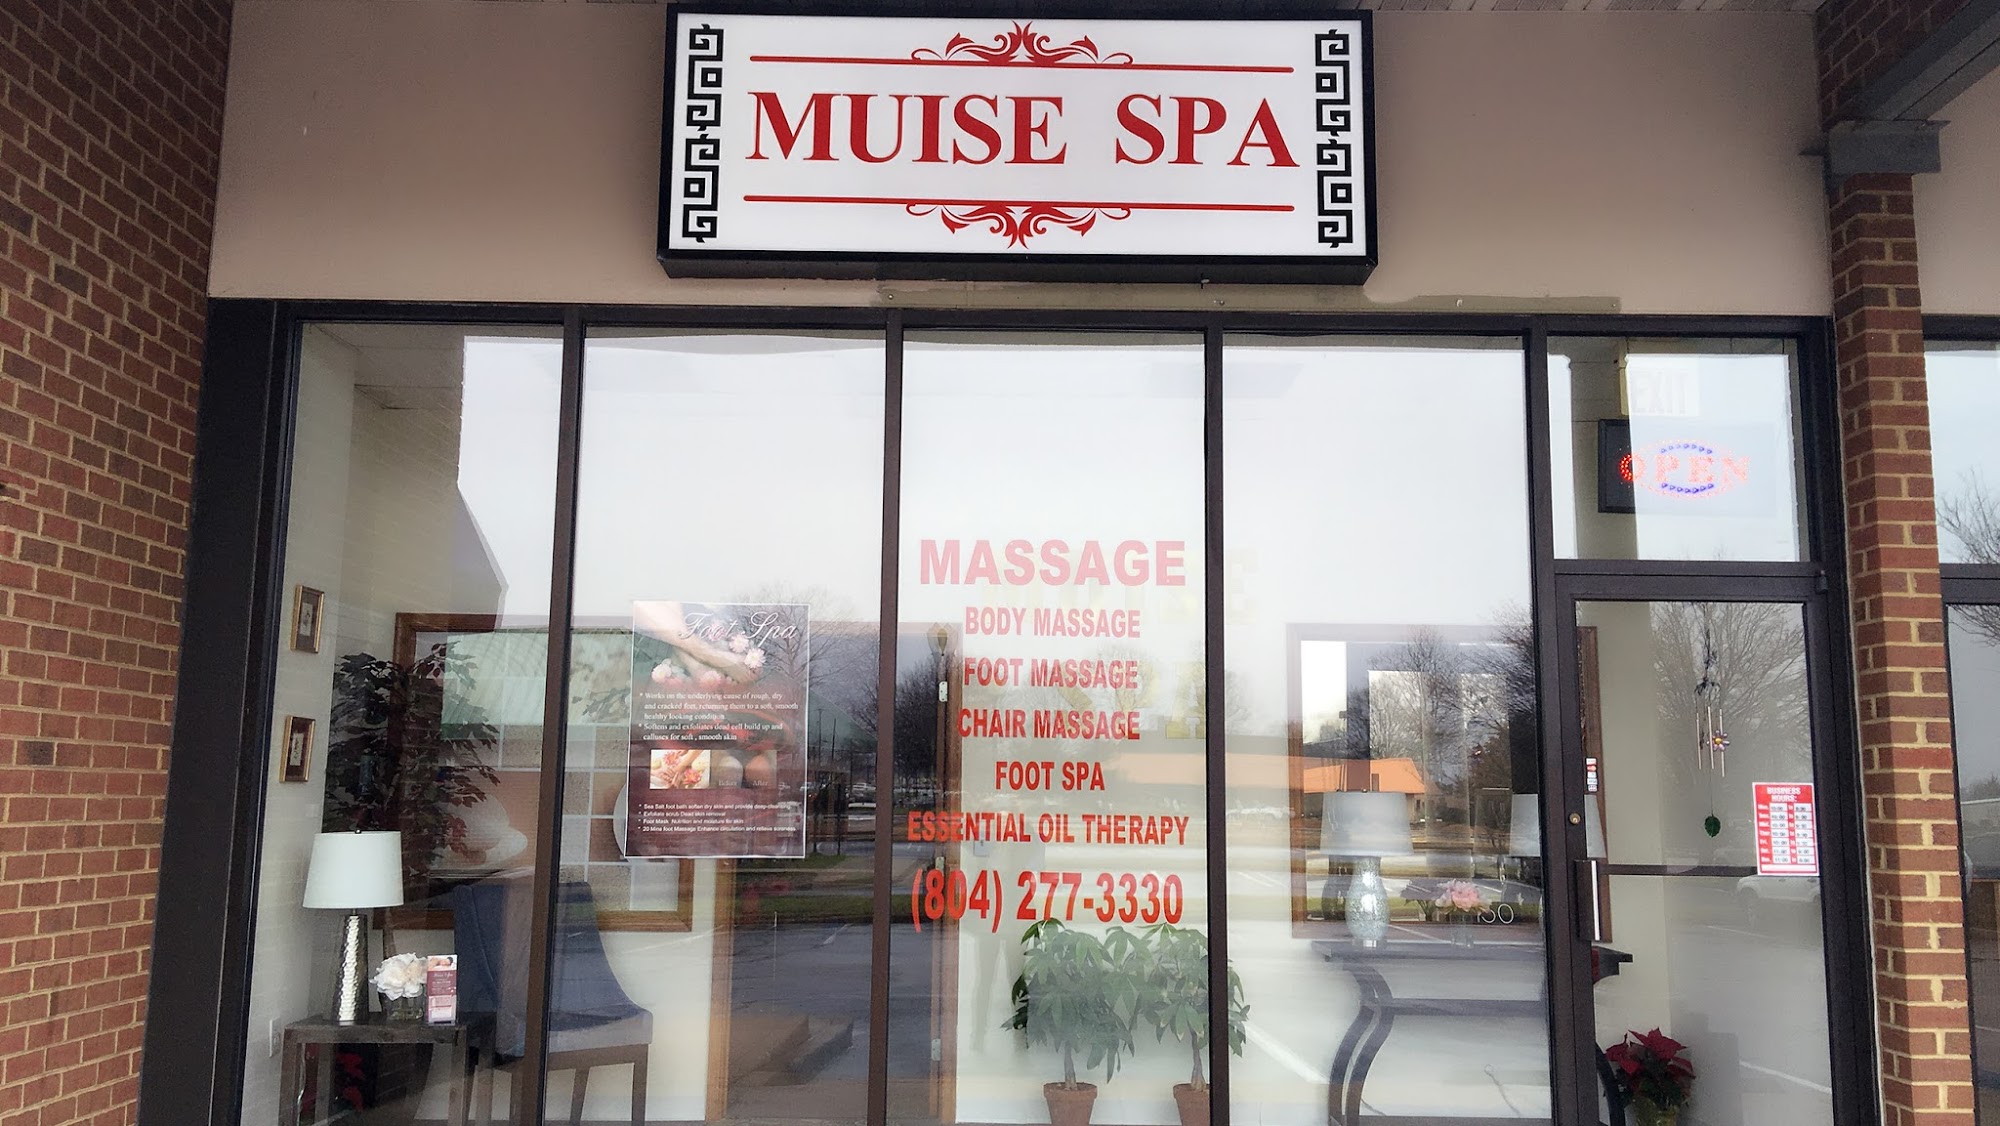 Muise spa